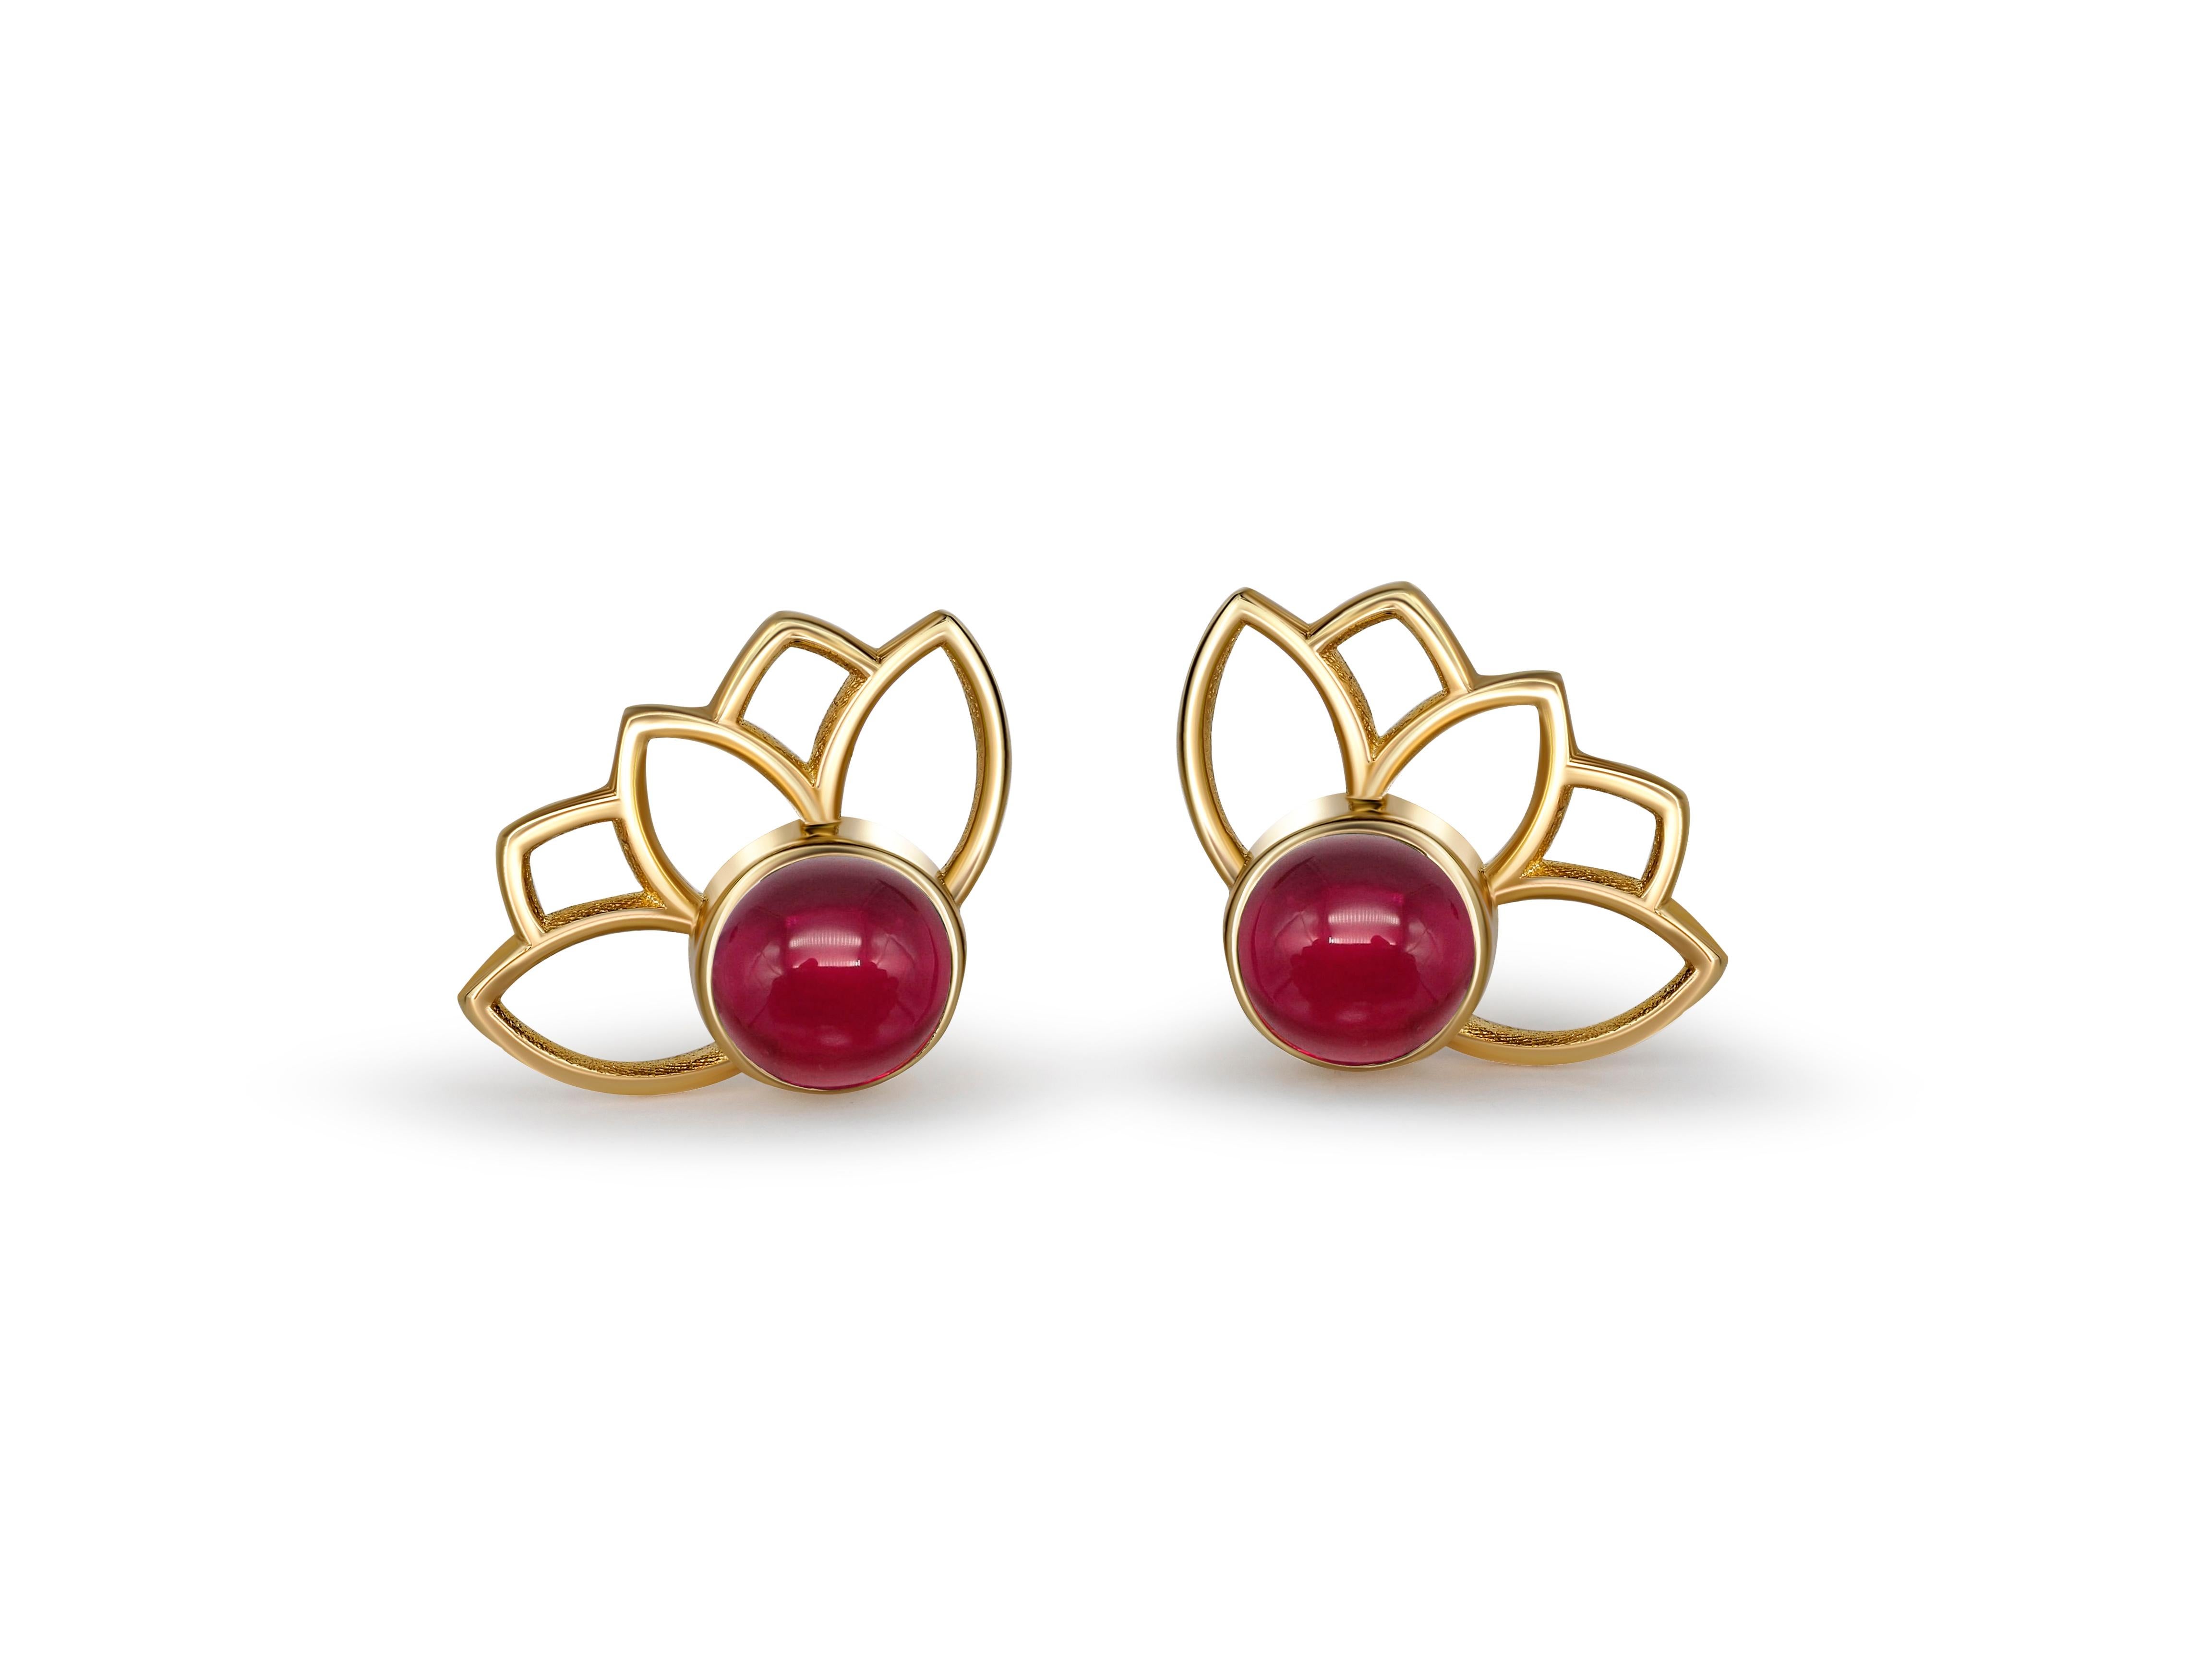 Lotus earrings studs with rubies in 14k gold. Rubies cabochon earrings. Ruby Gold Earrings. Flower gold earrings. 

Metal: 14 karat gold
Weight: 1.5 g.
Size: 11.45 x 8.35 mm.
Set with genuine  rubies: weight - 0.45 ct x 2 = 0.90 ct total.
Red color,